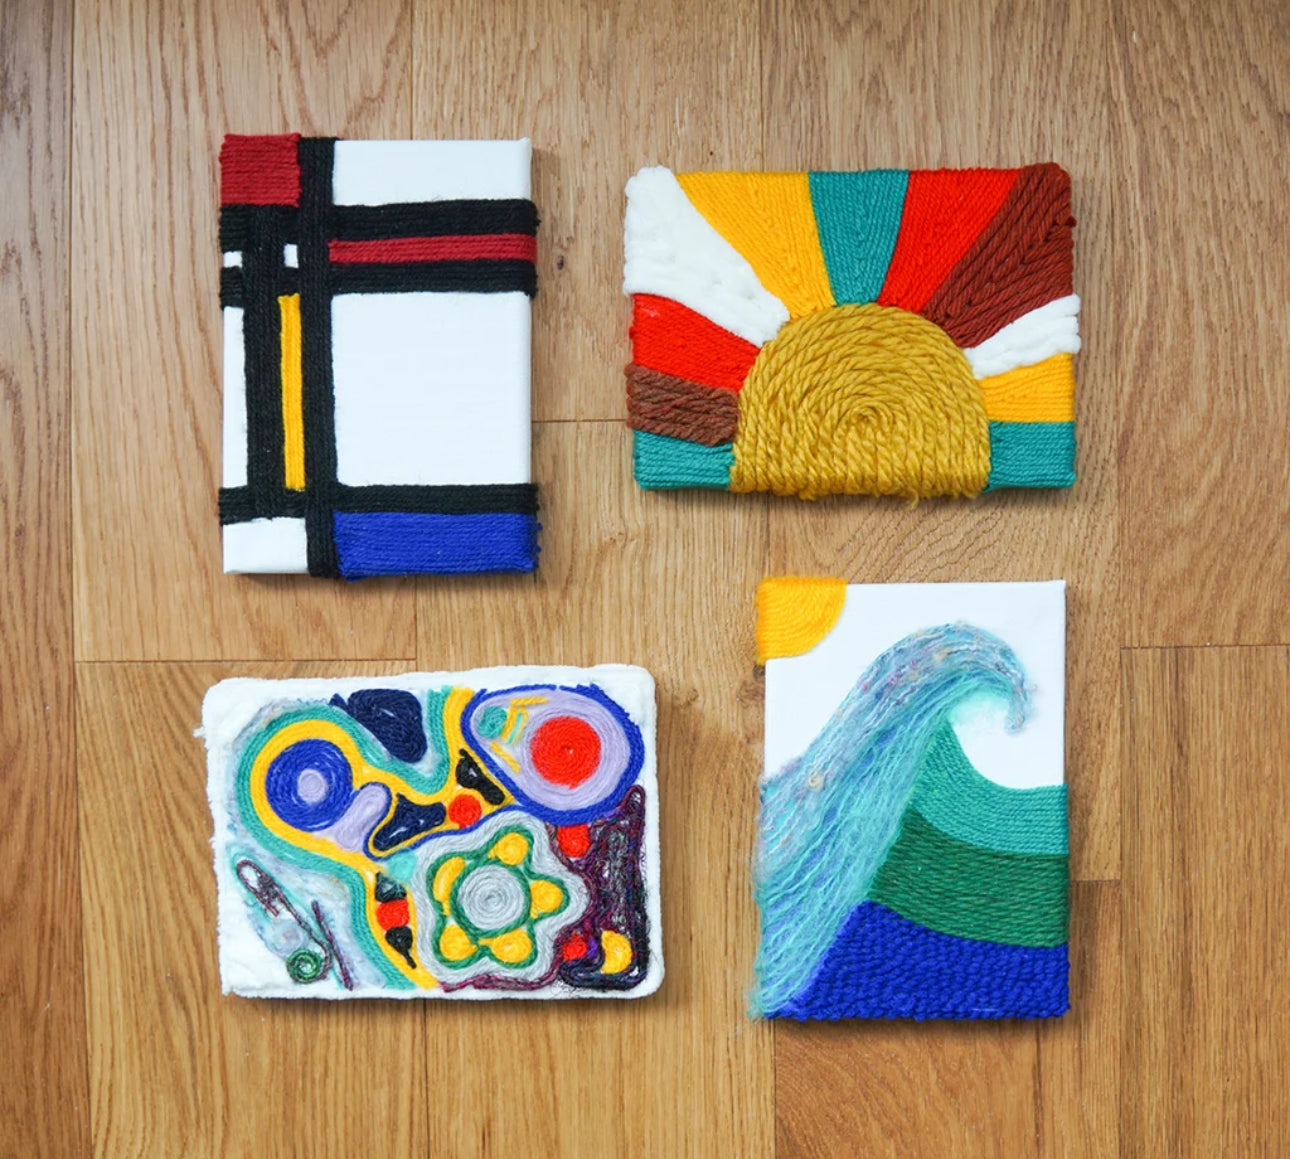 Pick Your Project - Yarn Art